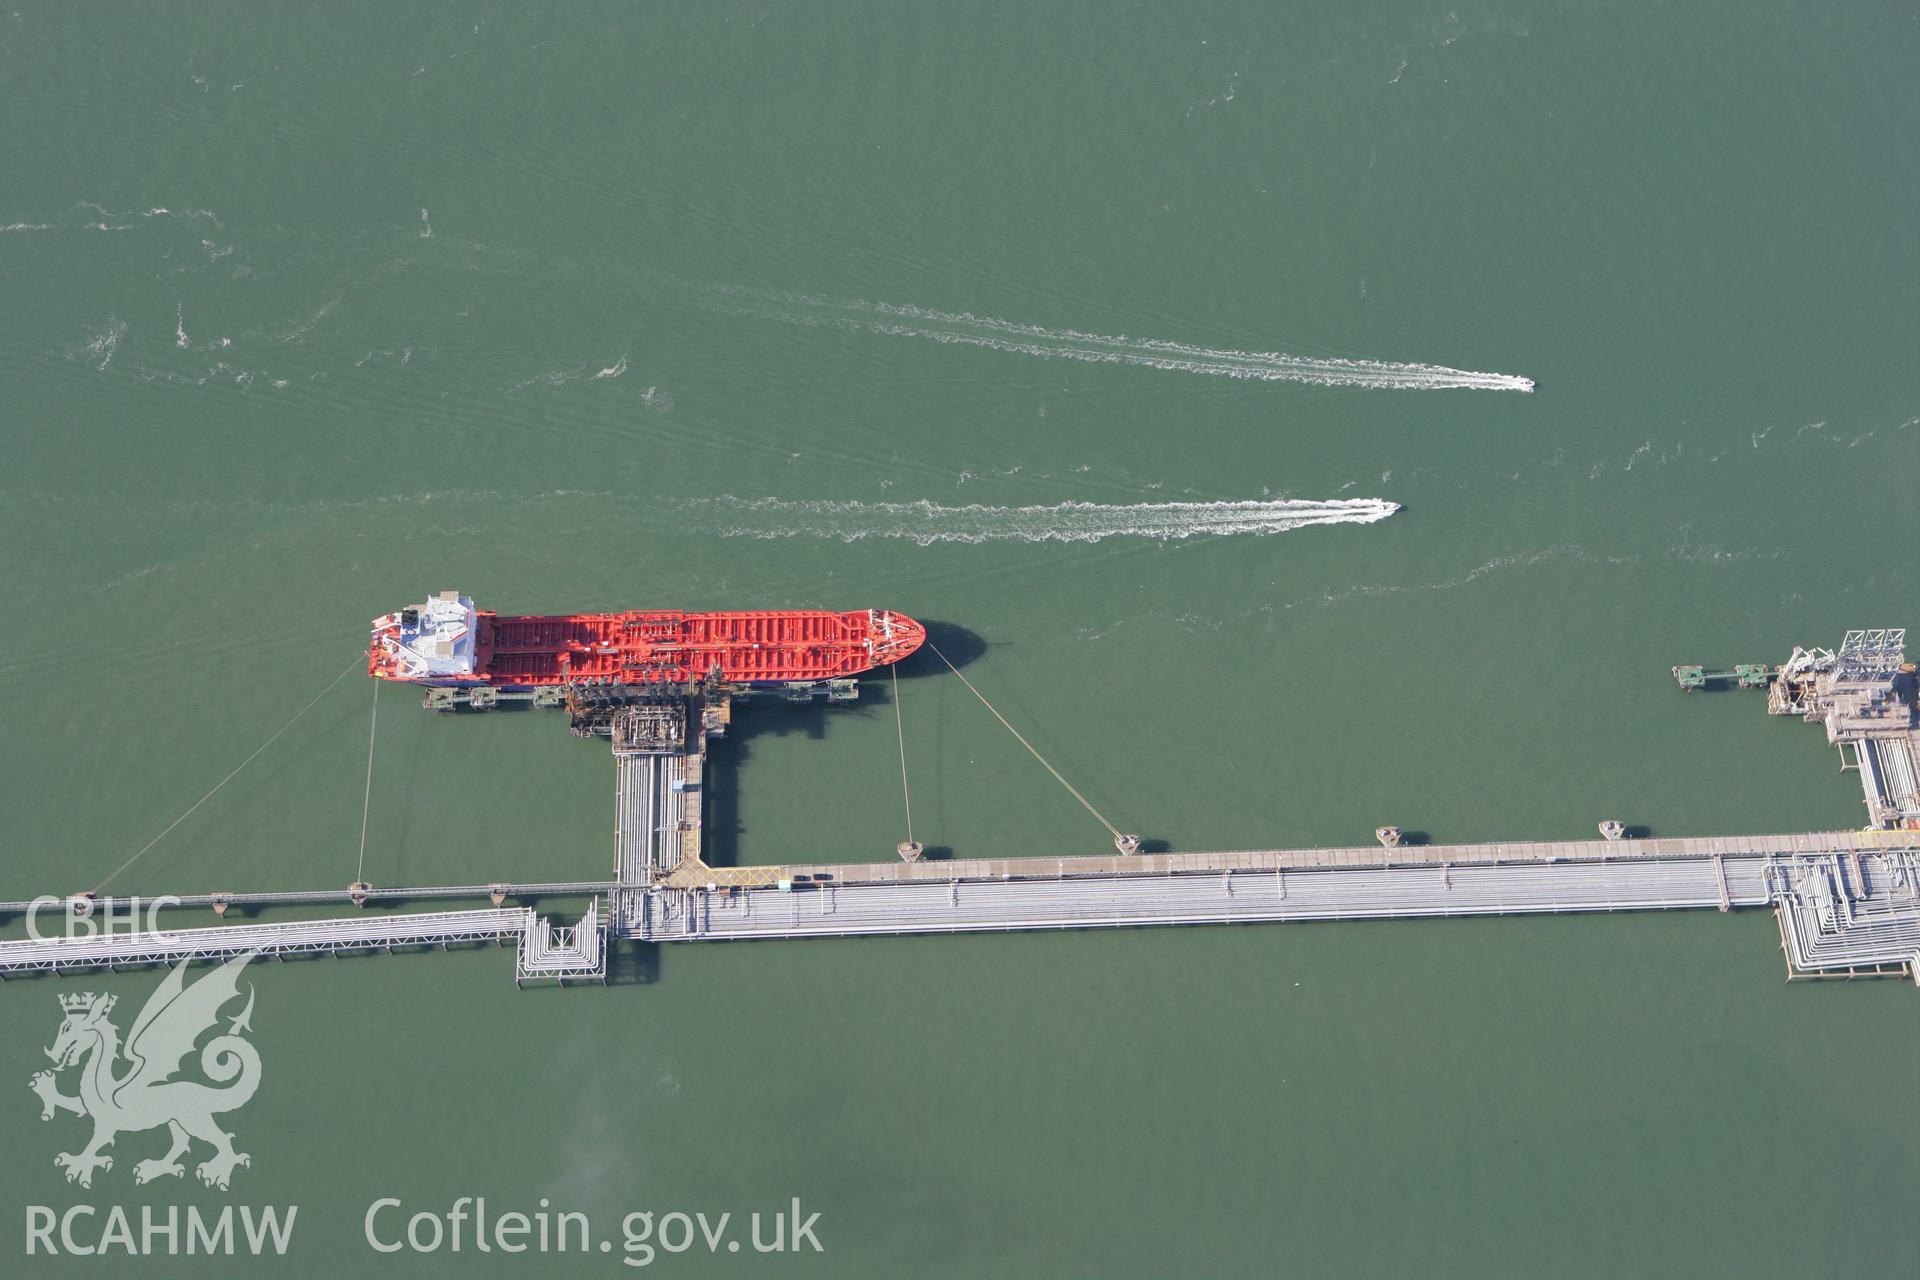 RCAHMW colour oblique aerial photograph of Milford Haven Waterway and jetty. Taken on 30 July 2007 by Toby Driver